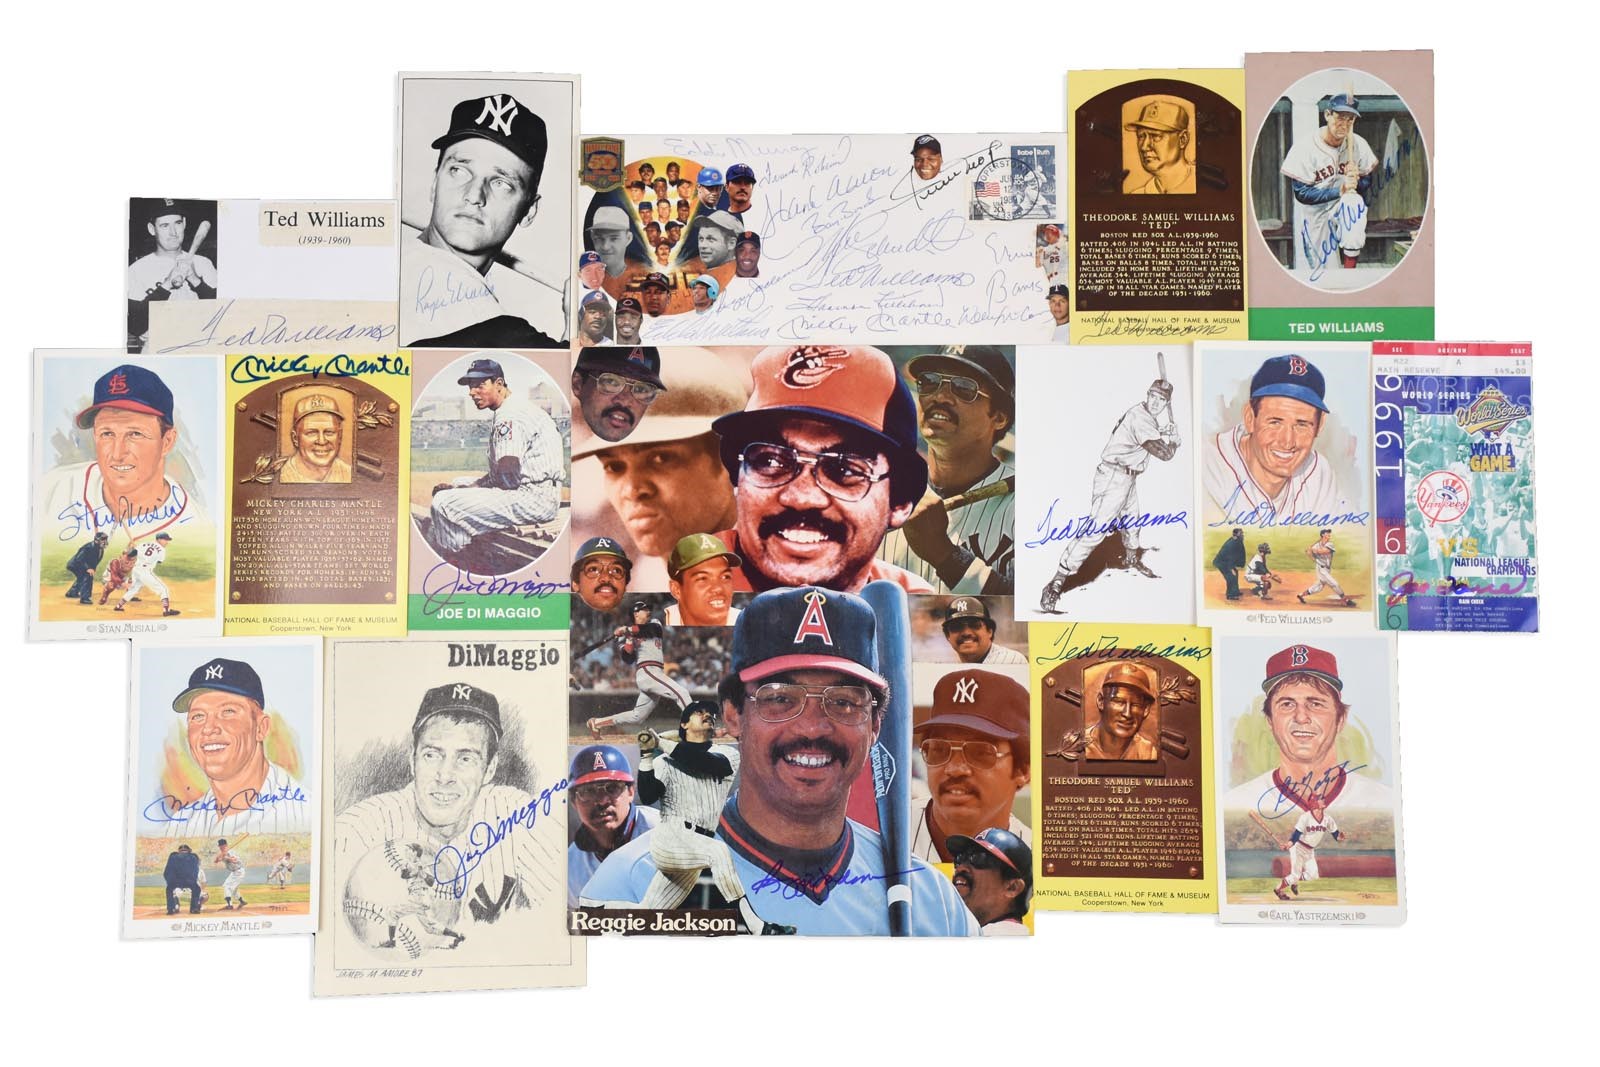 Hall of Famers and Stars Autograph Collection - (5) Mantle (9), Williams, Maris (250+)